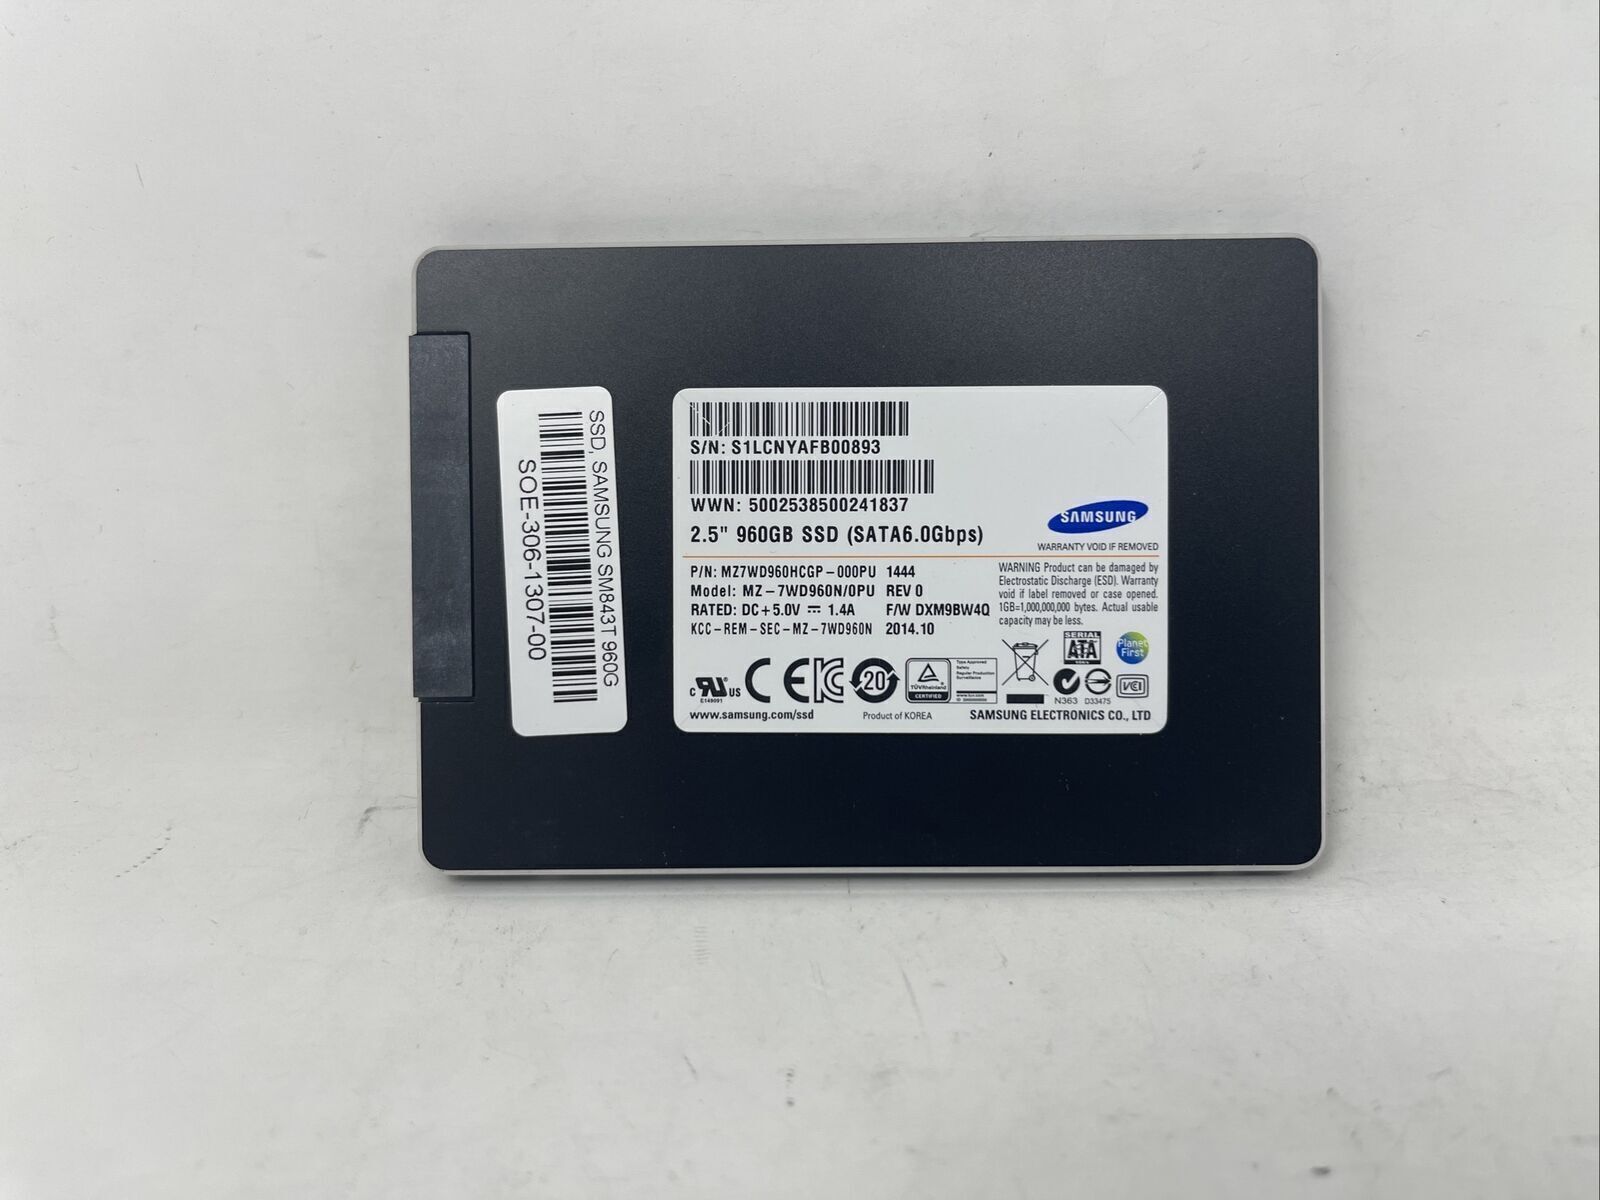 Samsung SV843 MZ-7WD960T/003 960GB 2.5in 6Gbps Mixed Use SATA SSD